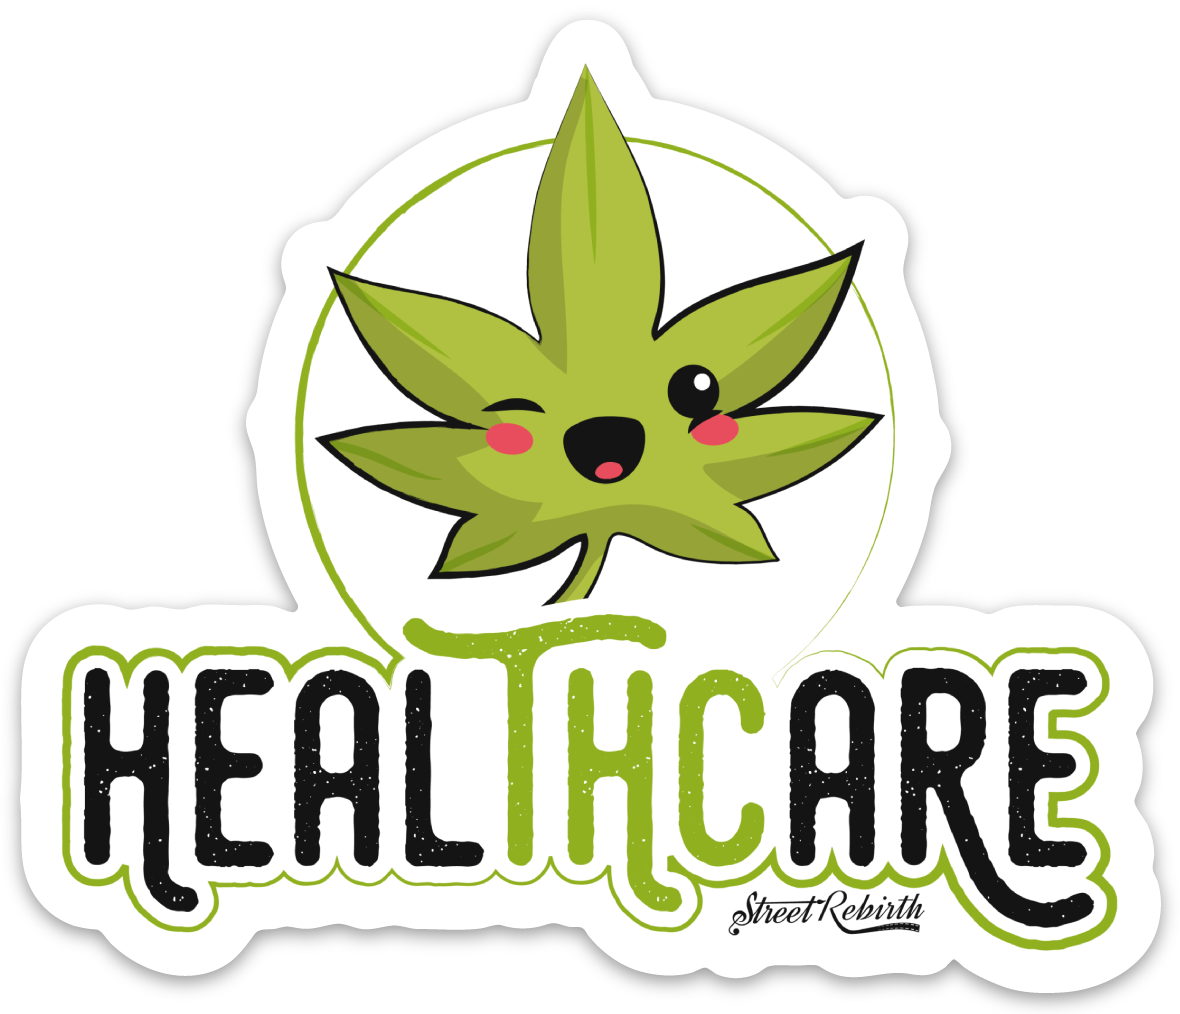 HEALTHCARE PUN STICKER – ONE 4 INCH WATER PROOF VINYL STICKER – FOR HYDRO FLASK, SKATEBOARD, LAPTOP, PLANNER, CAR, COLLECTING, GIFTING